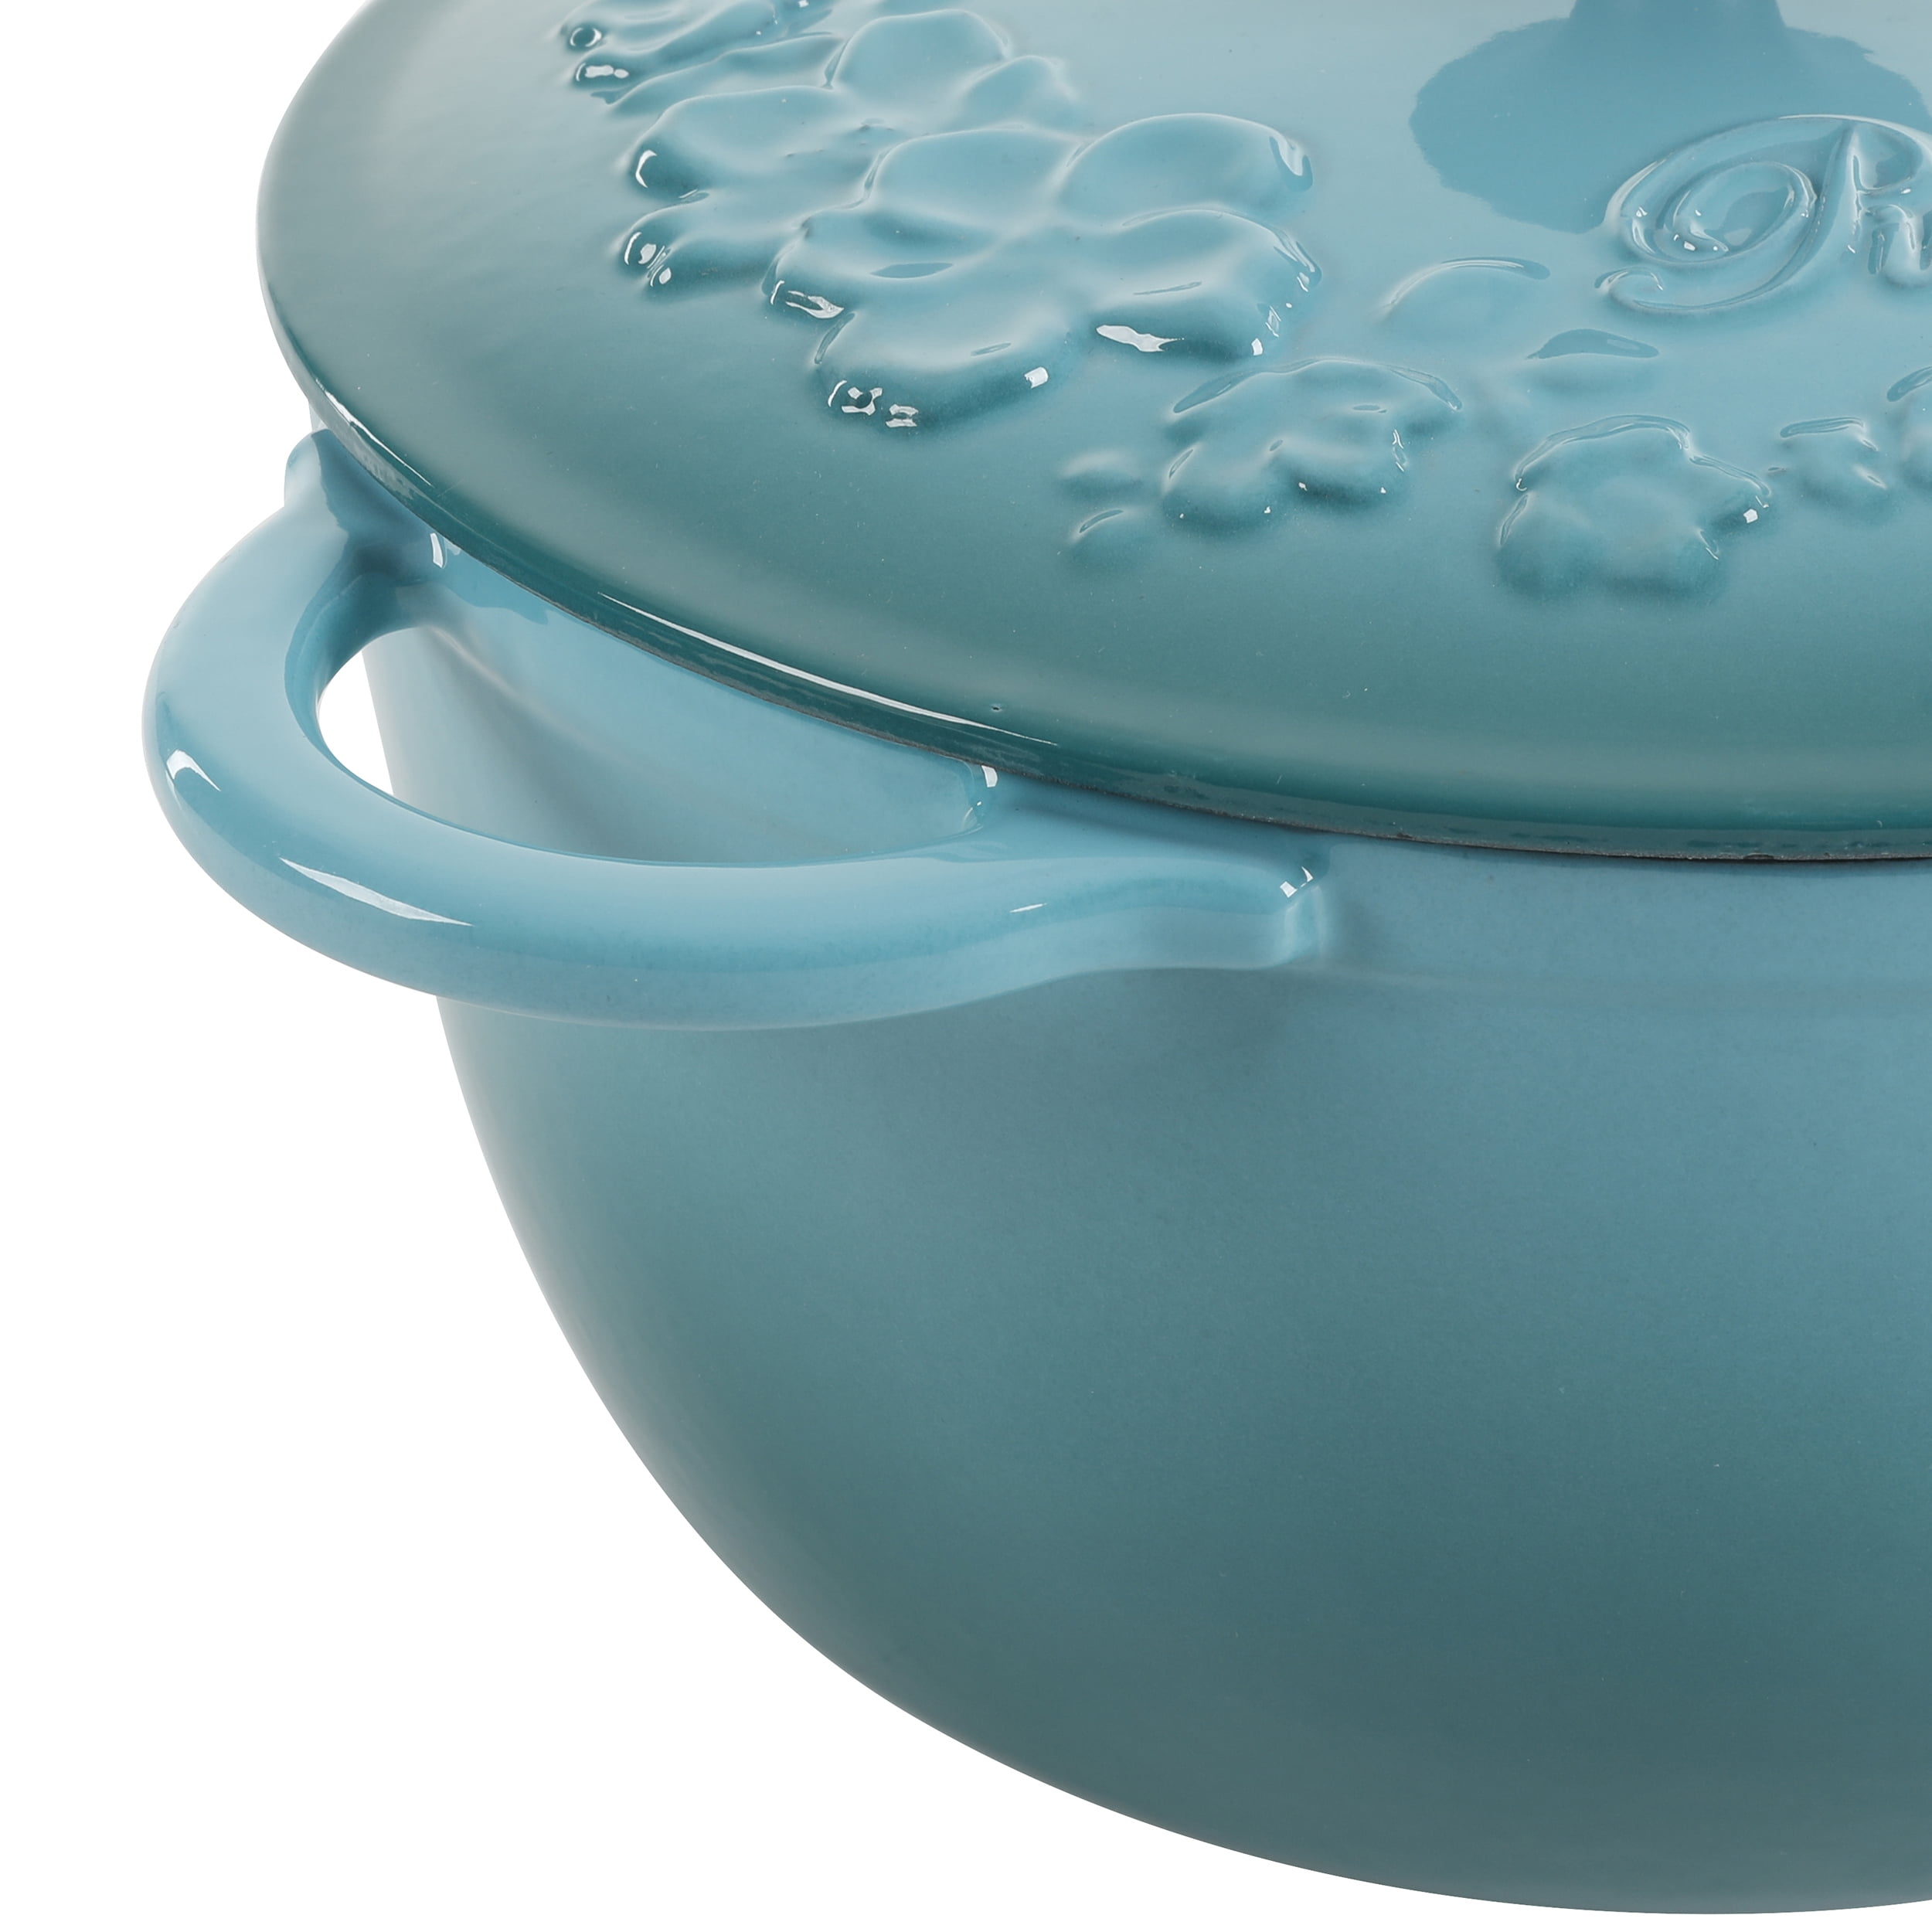 The Pioneer Woman Timeless Beauty Enamel on Cast Iron 6-Qt Dutch Oven,  Turquoise 